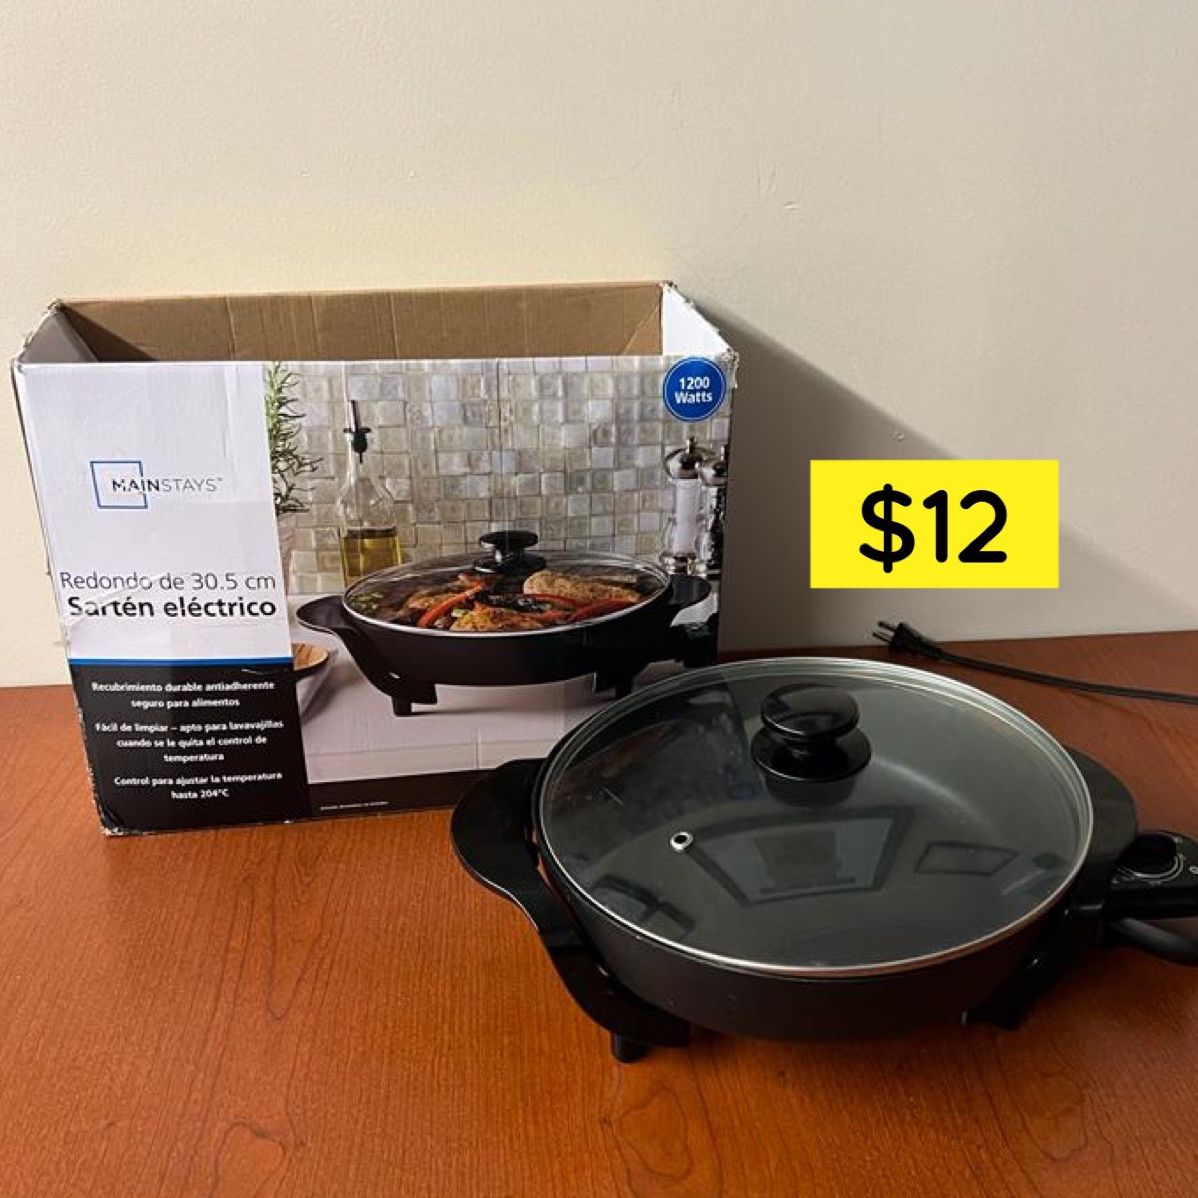 New electric skillet for Sale in Los Angeles, CA - OfferUp